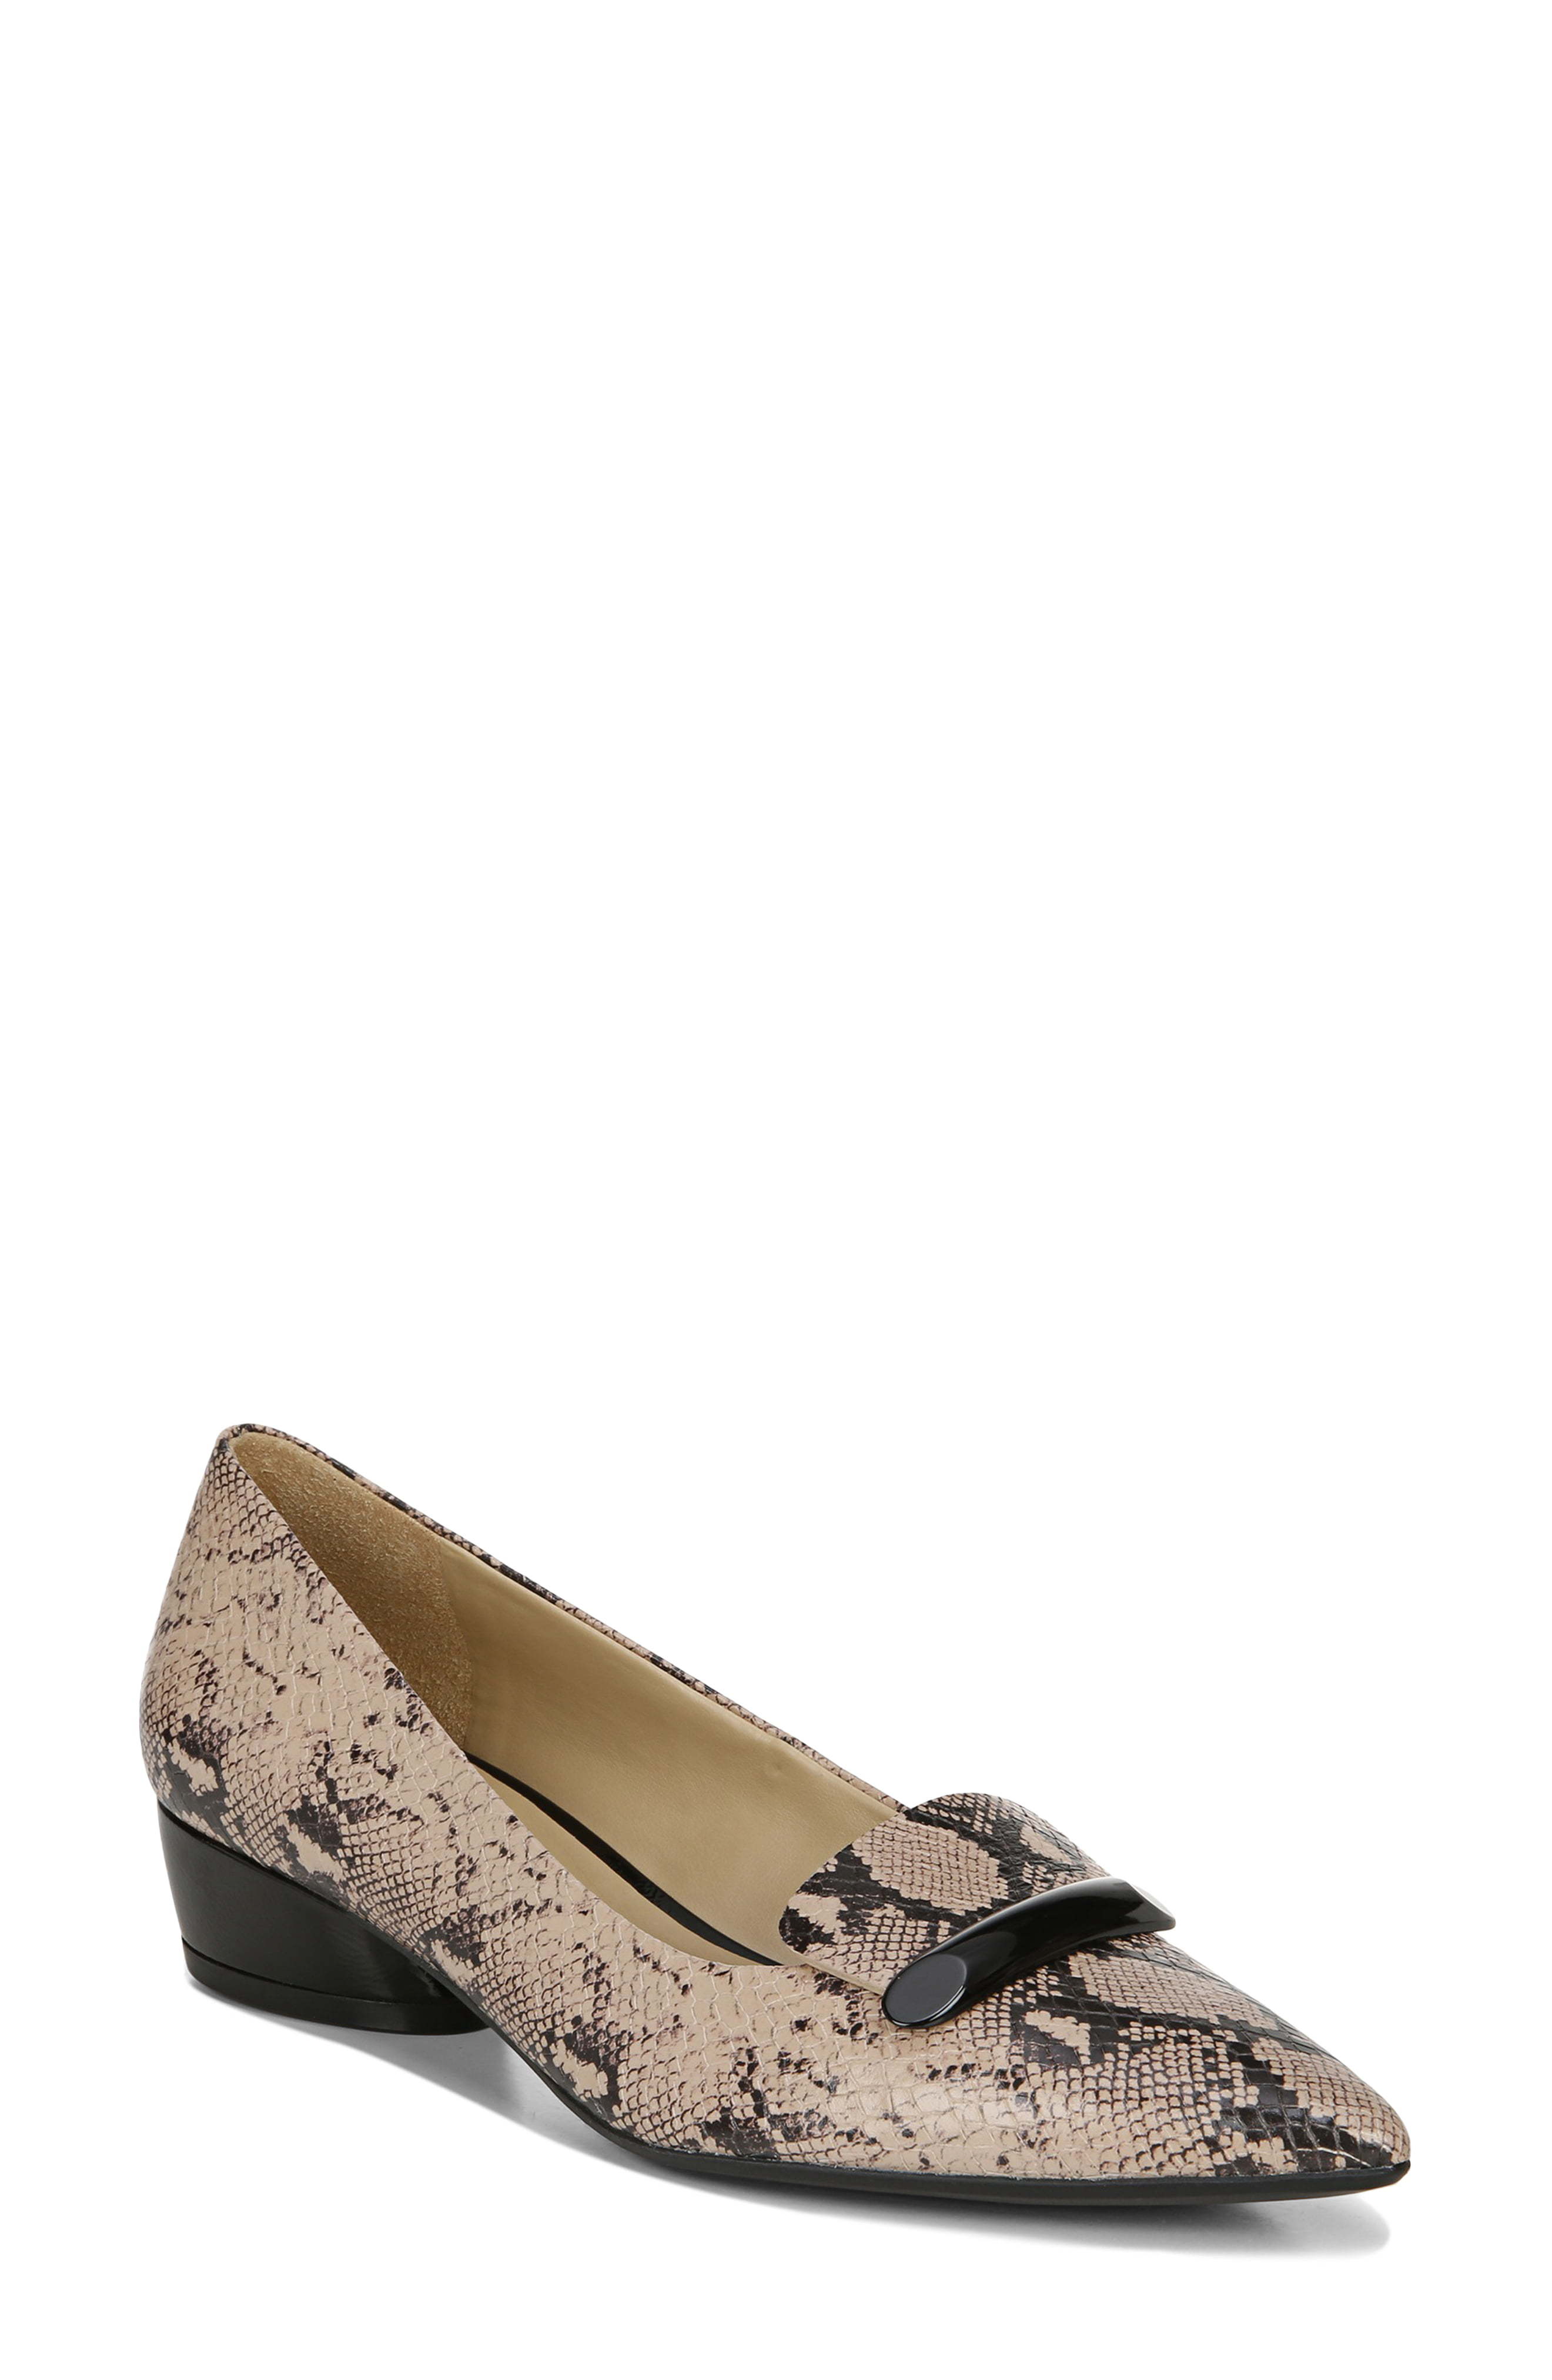 Naturalizer Booker Pointed Toe Pump, $39 | Nordstrom | Lookastic